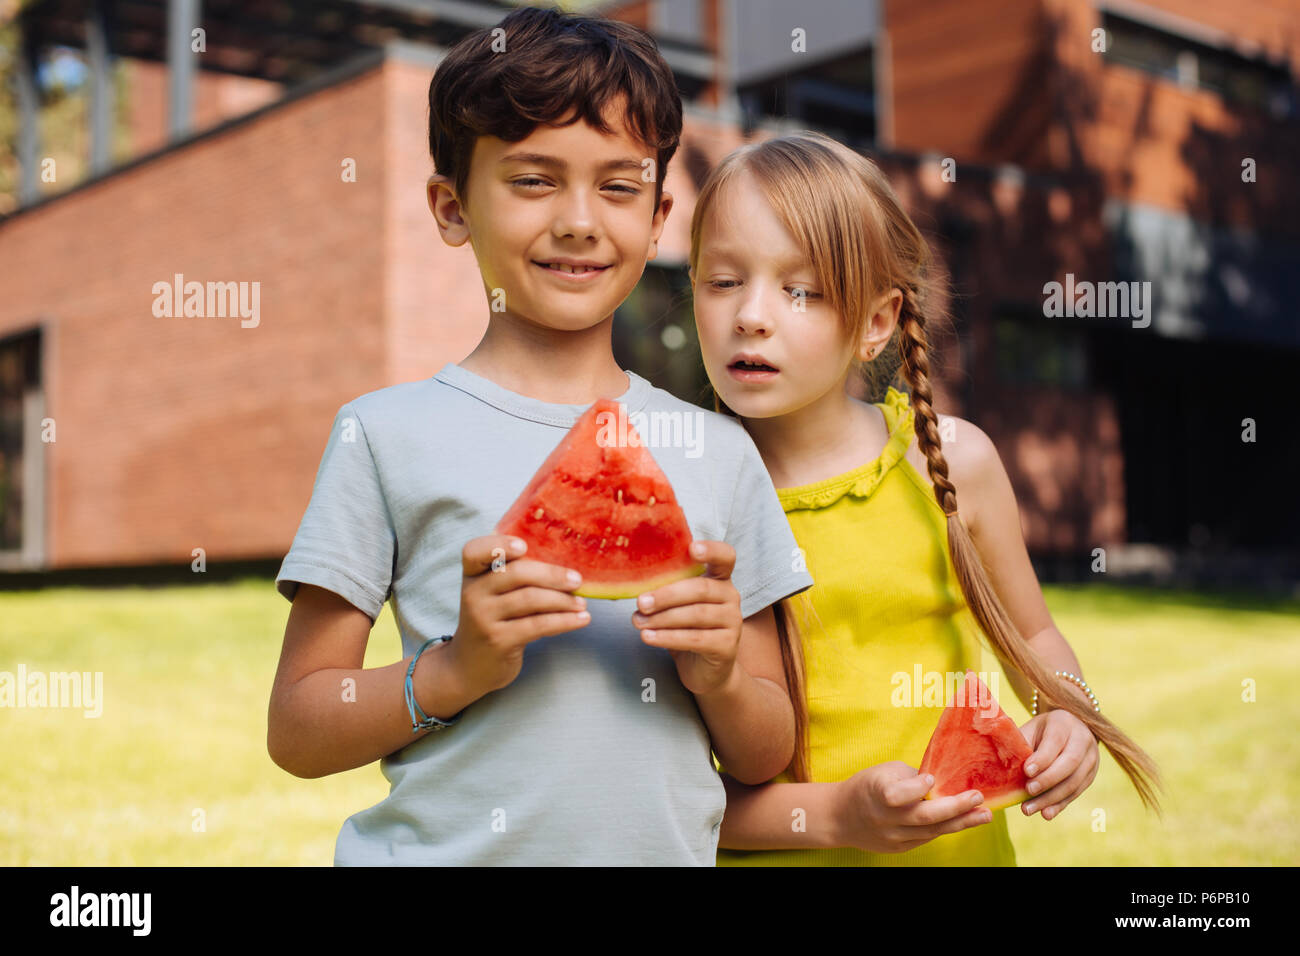 Inspired children eating a ripe watermelon Stock Photo